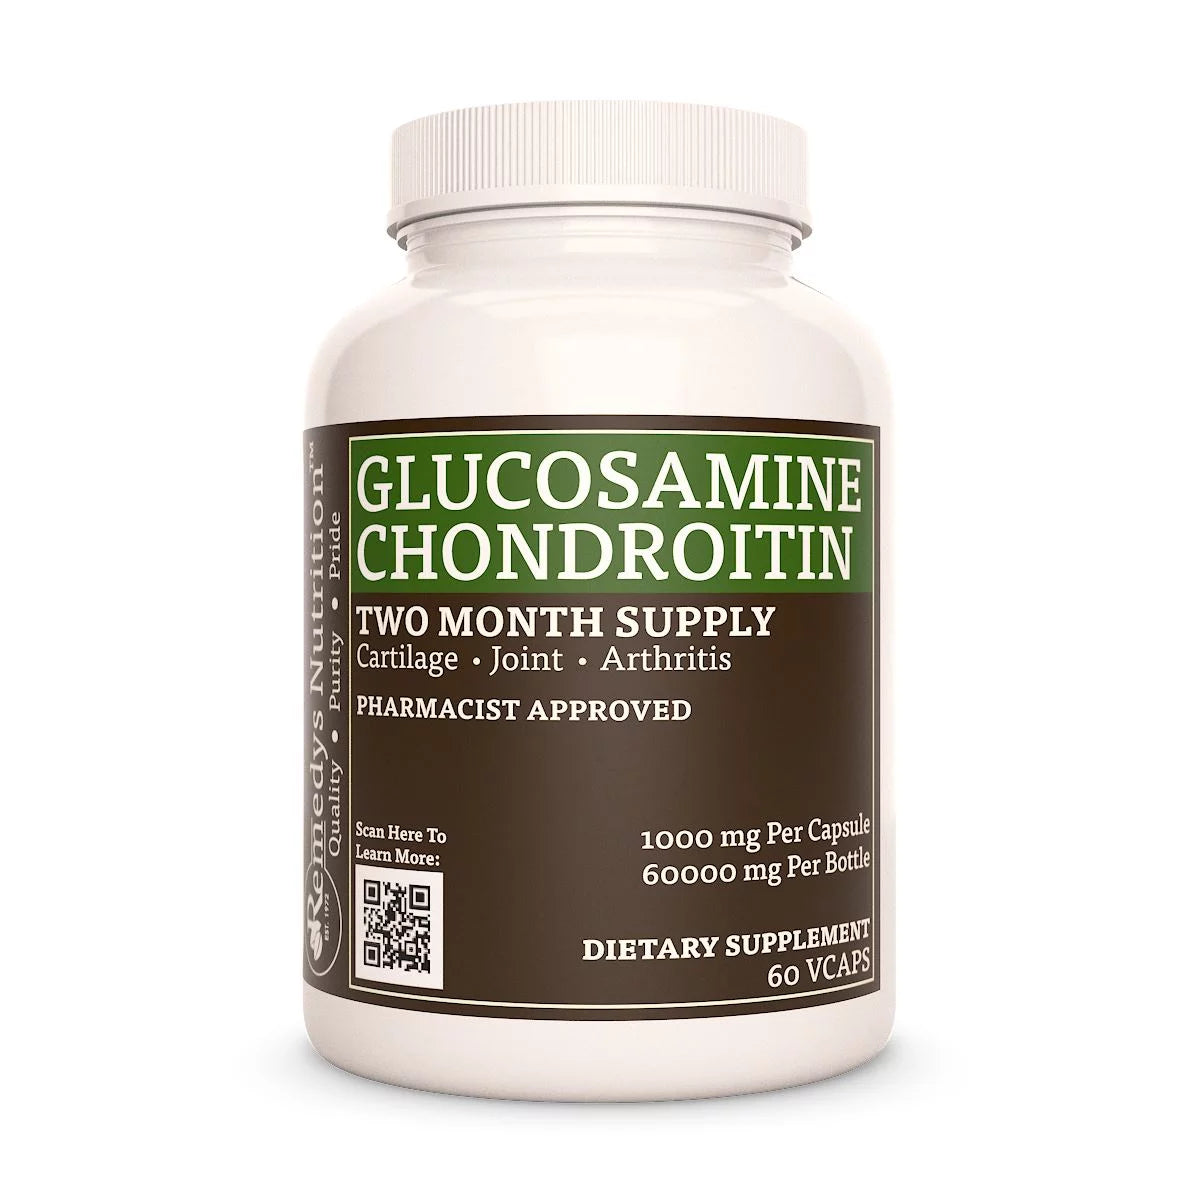 Image of Remedy's Nutrition® Glucosamine Chondroitin Capsules Dietary Supplement front bottle. Made in the USA.